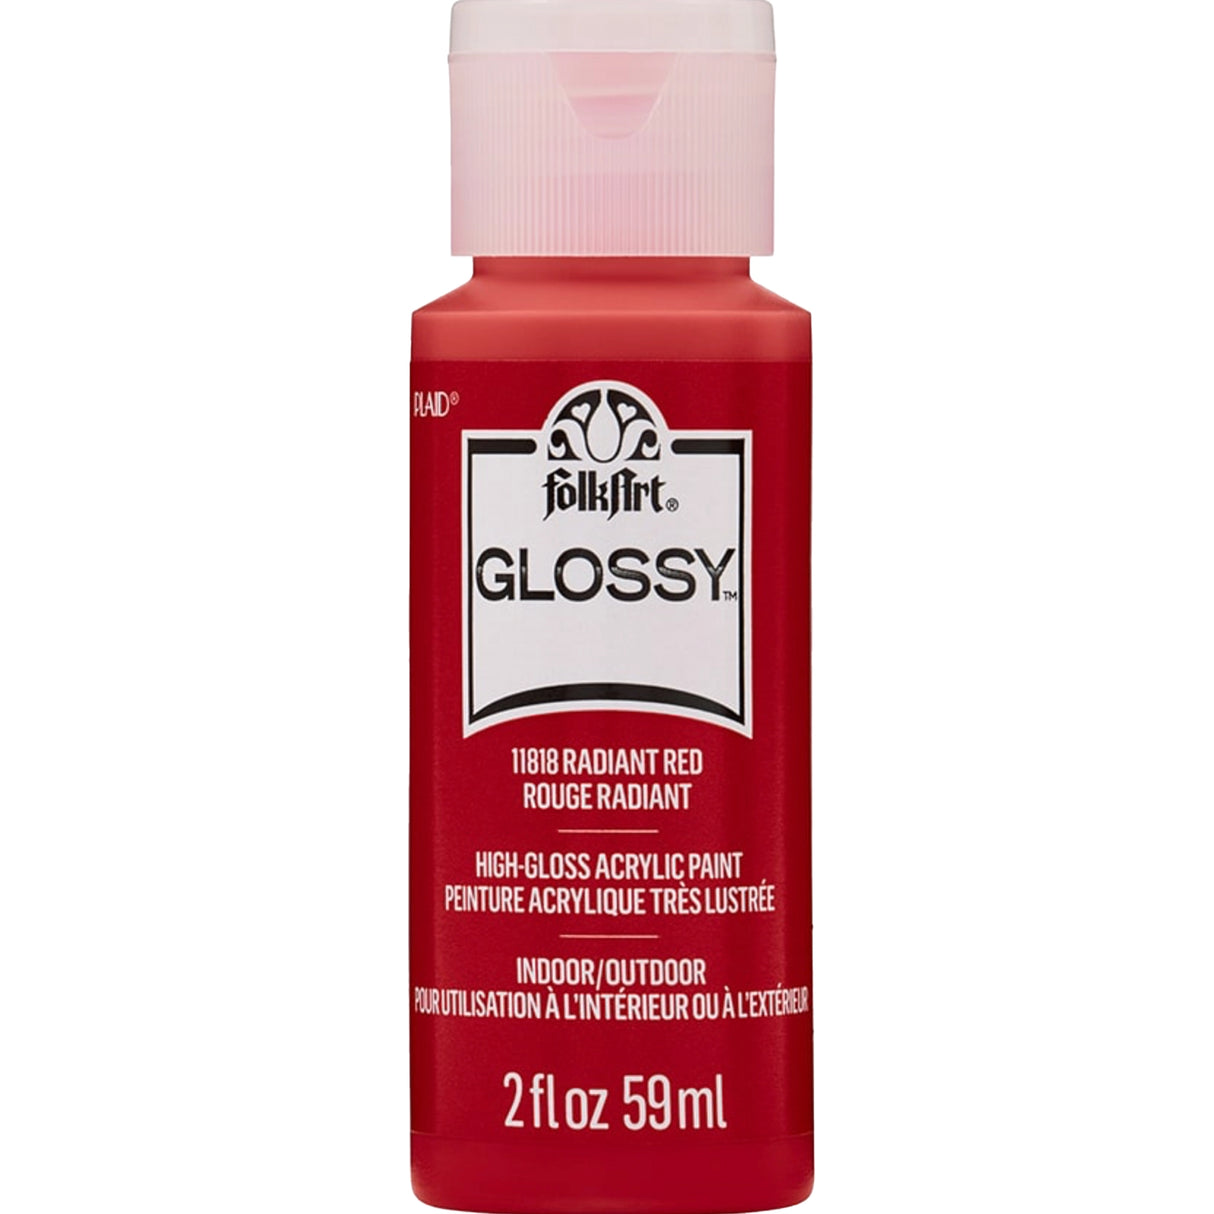 glossy acrylic paint radiant red